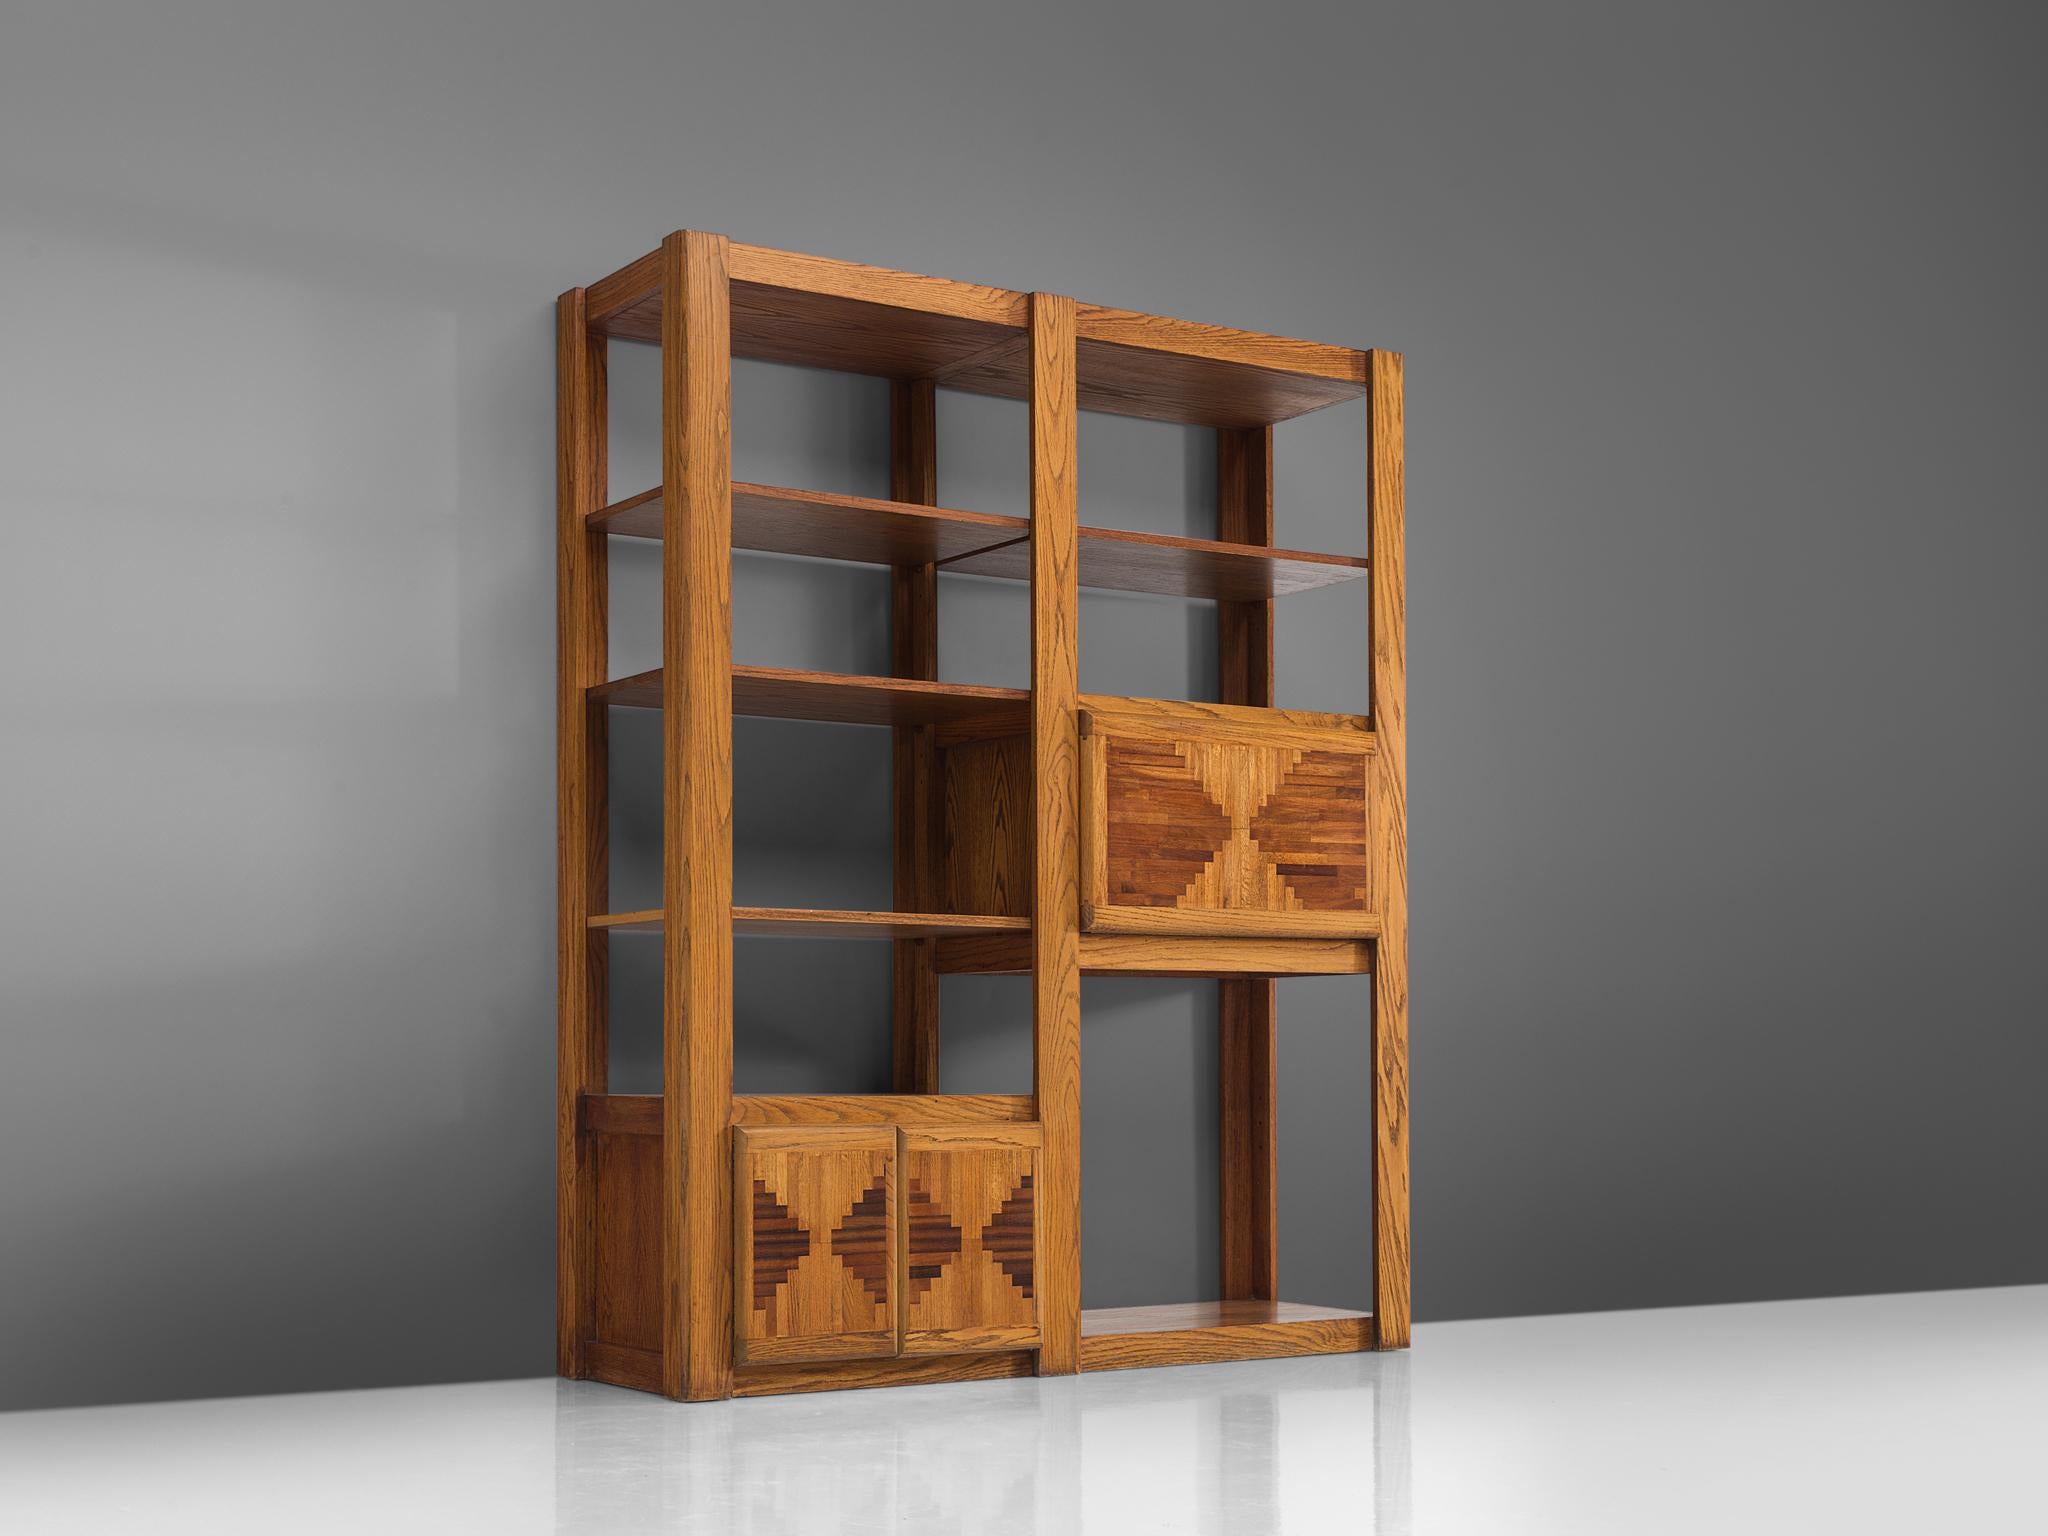 Bookshelf, walnut, Italy, 1950s

This grand custom-made open shelf was made in the 1950s. The design of this original cabinet shows two cabinets with inlayed doors. Two columns feature multiple shelves. The bottom cabinet has two doors and the top